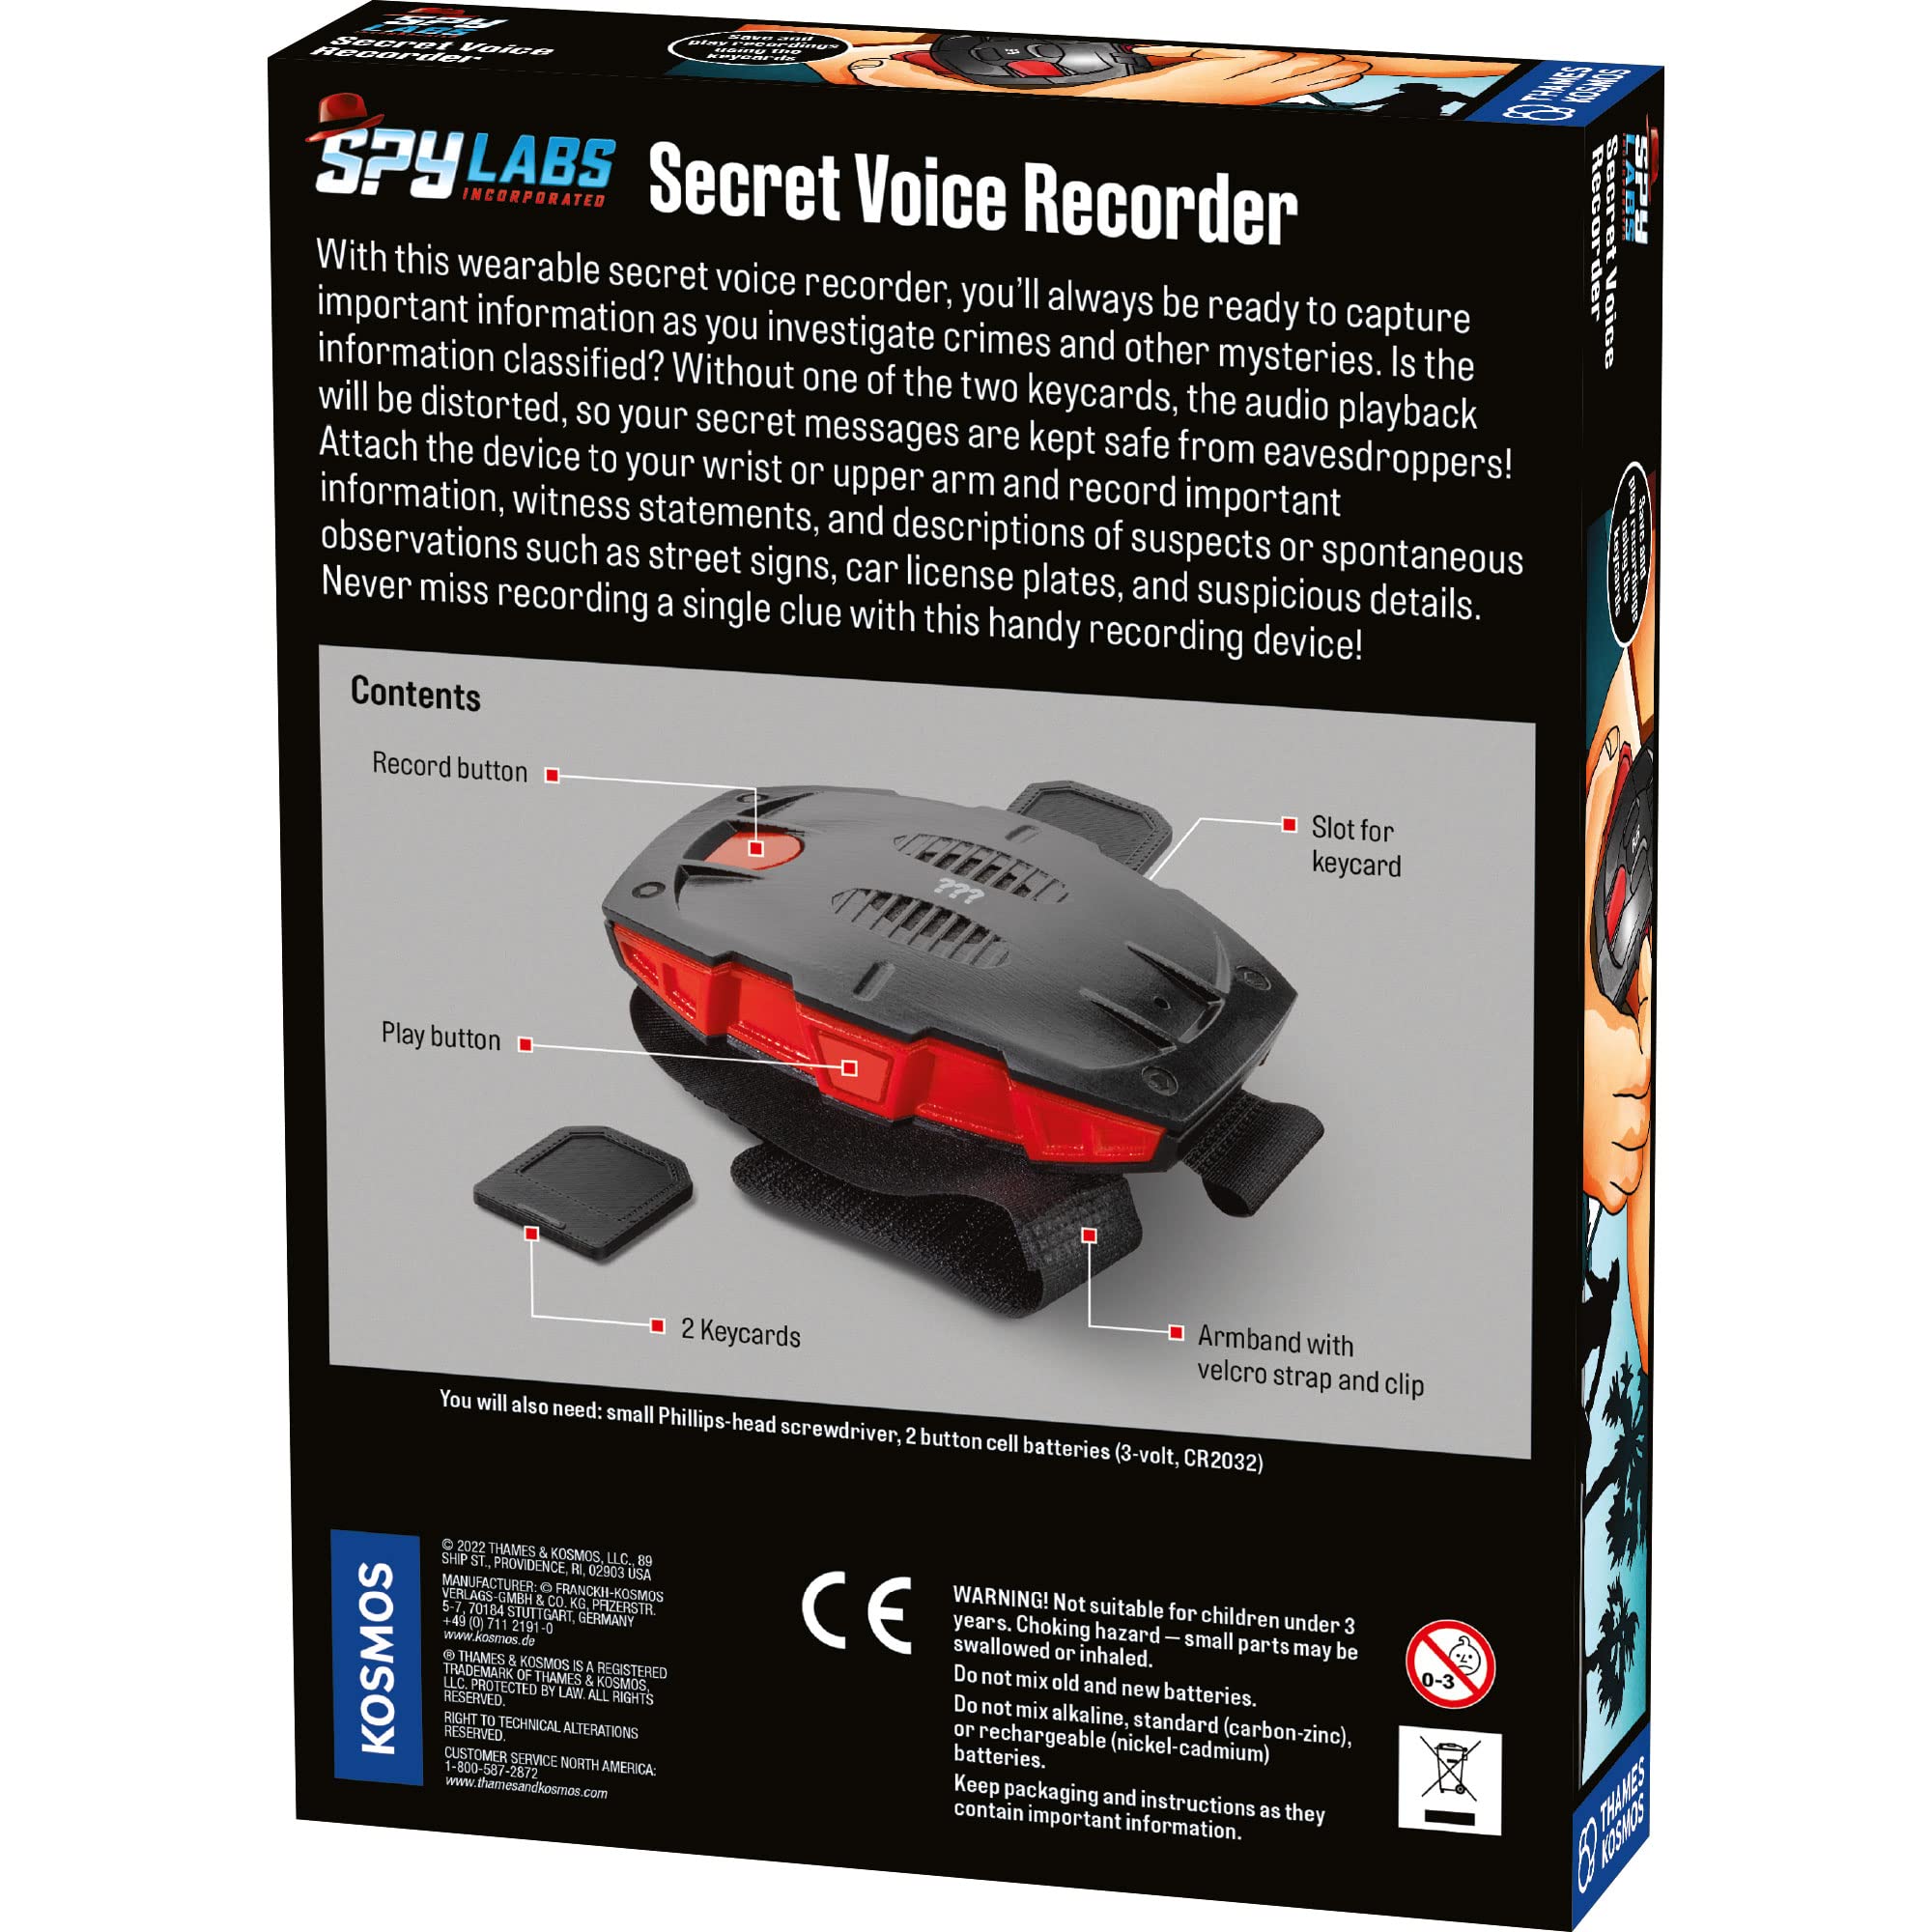 Spy Labs Inc: Digital Voice Recorder Toy by Thames & Kosmos | Wearable Audio Recorder | Essential Gadget from The Detective Gear Experts for Kid Investigators